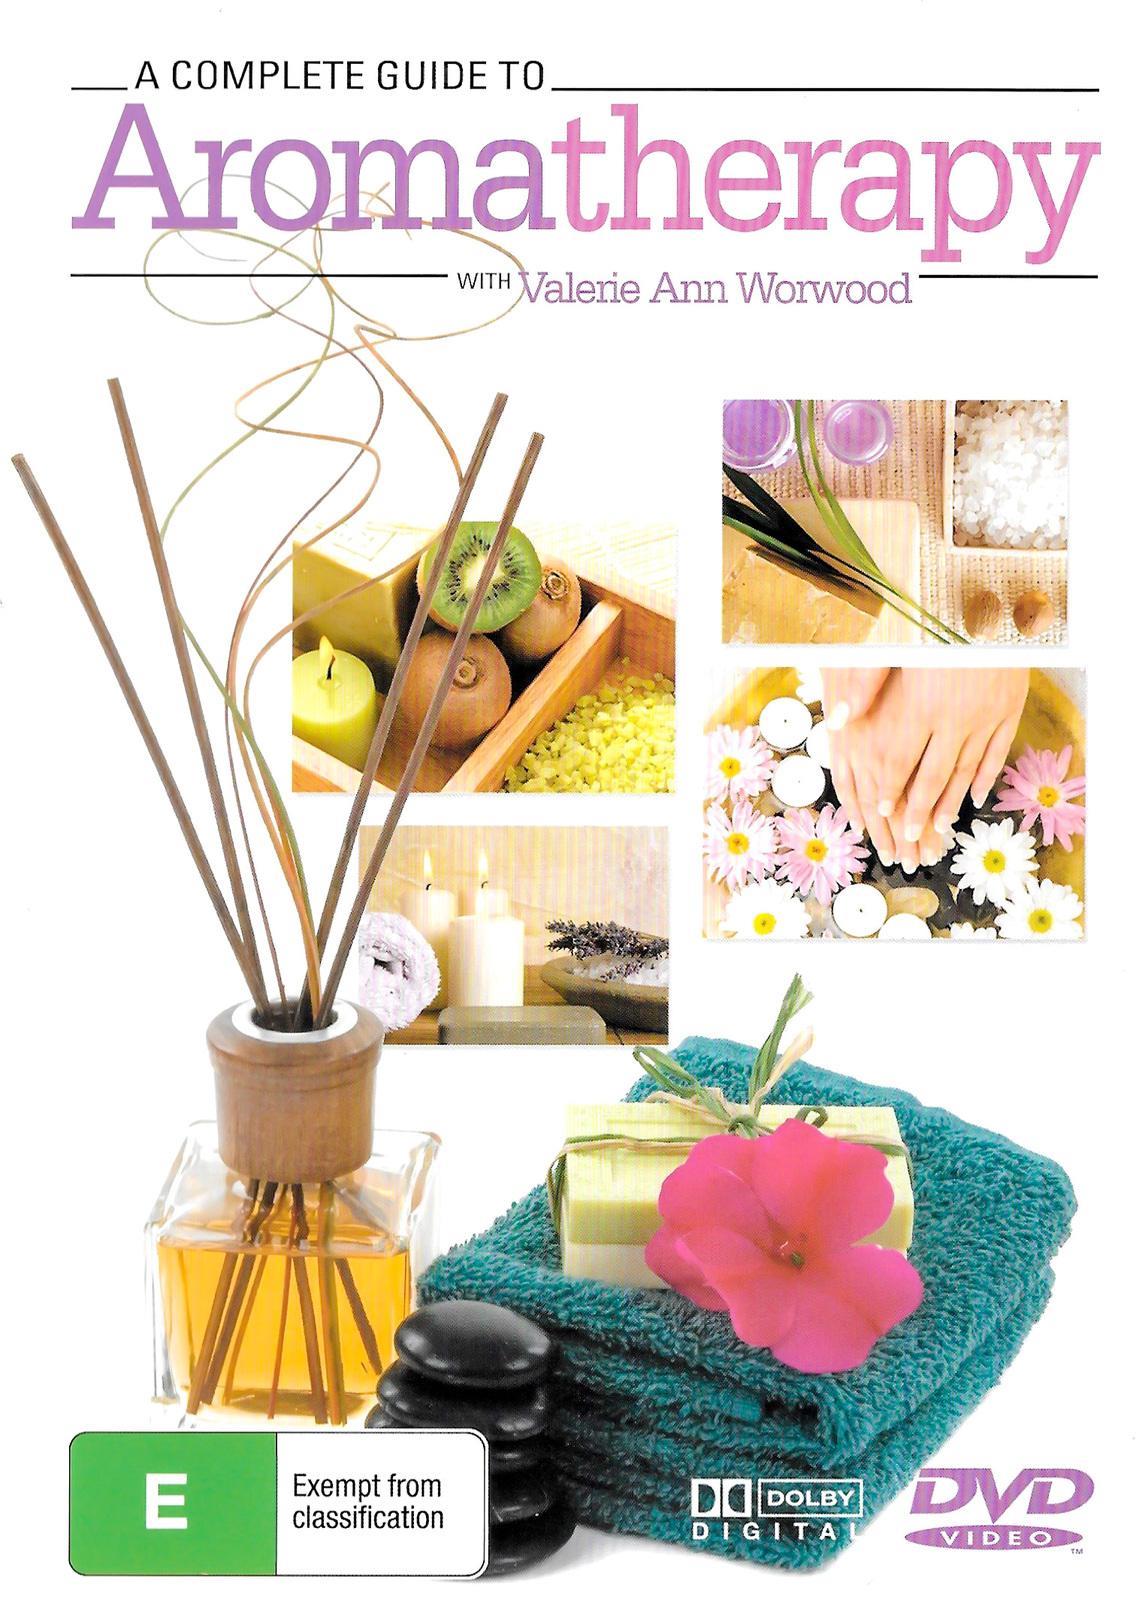 A Complete Guide to Aromatherapy Valerie Anna Worwood DVD